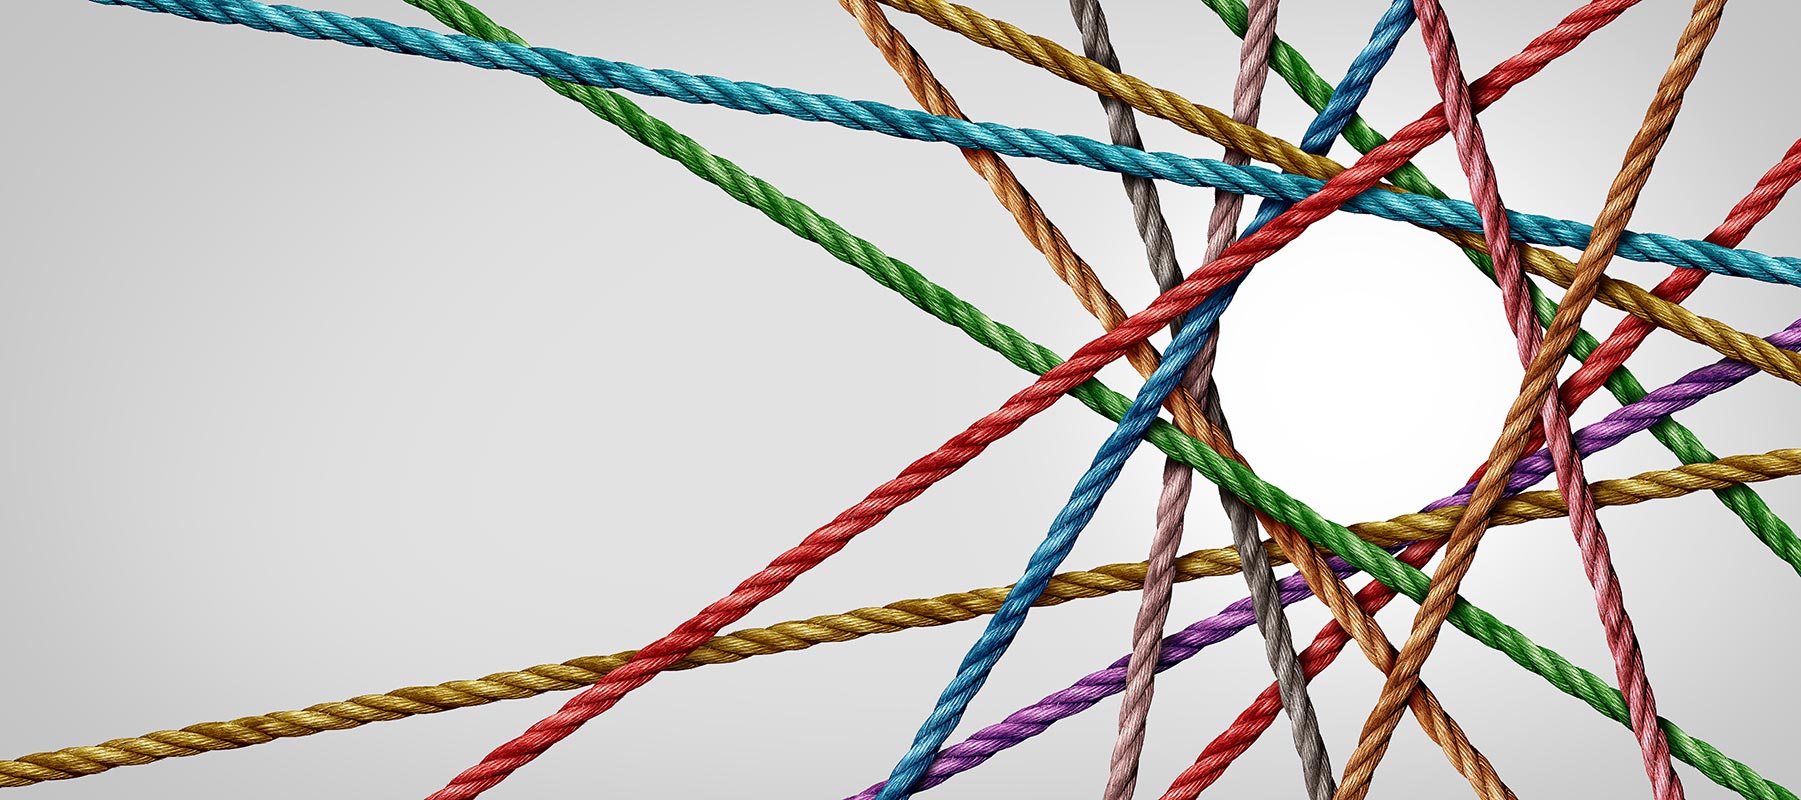 Different colors ropes in a circle formation